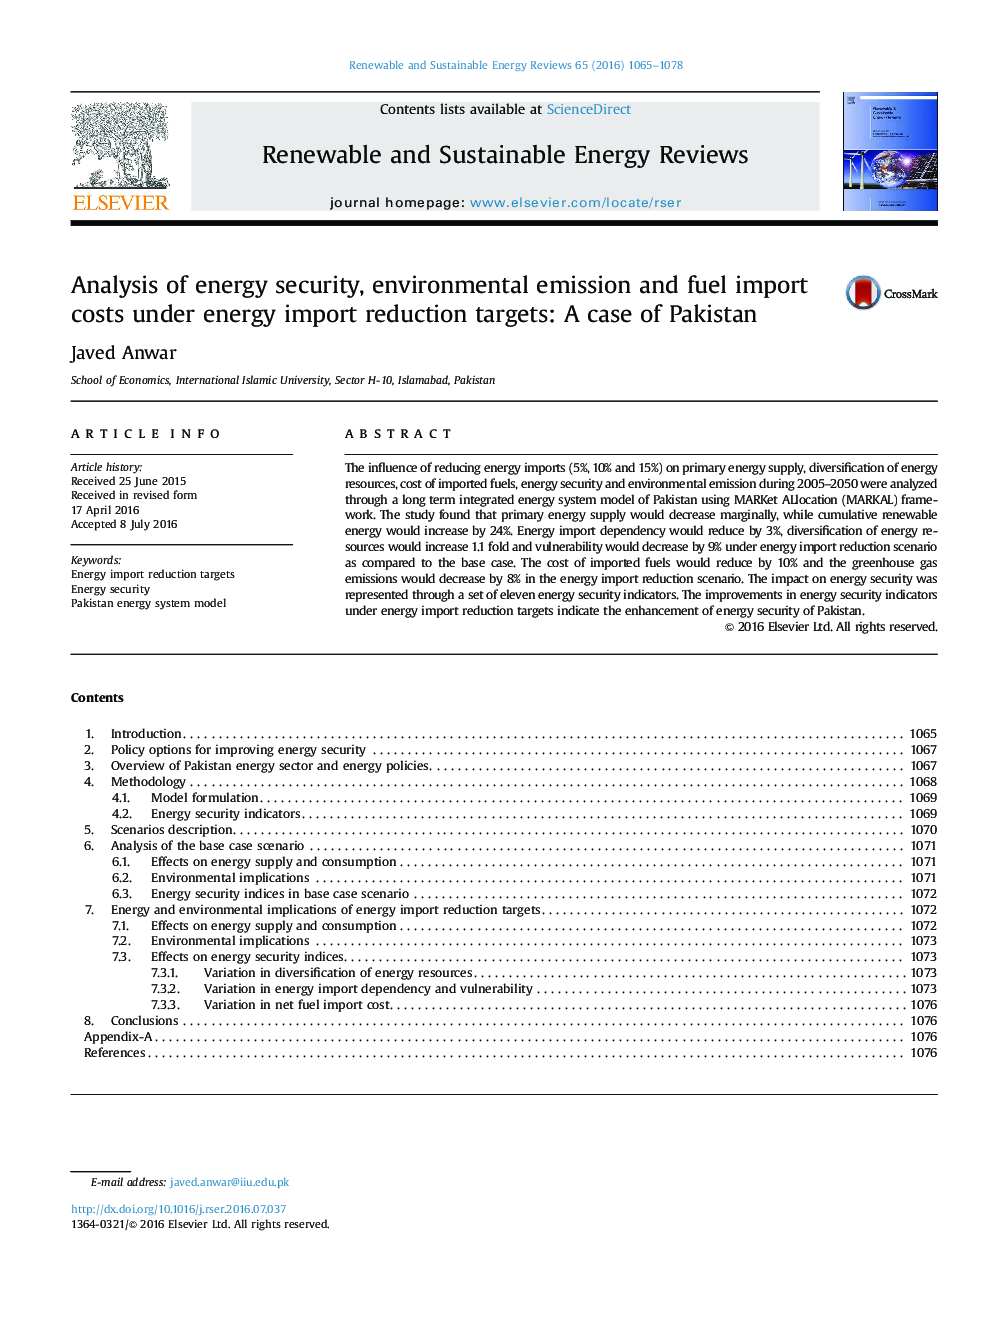 Analysis of energy security, environmental emission and fuel import costs under energy import reduction targets: A case of Pakistan